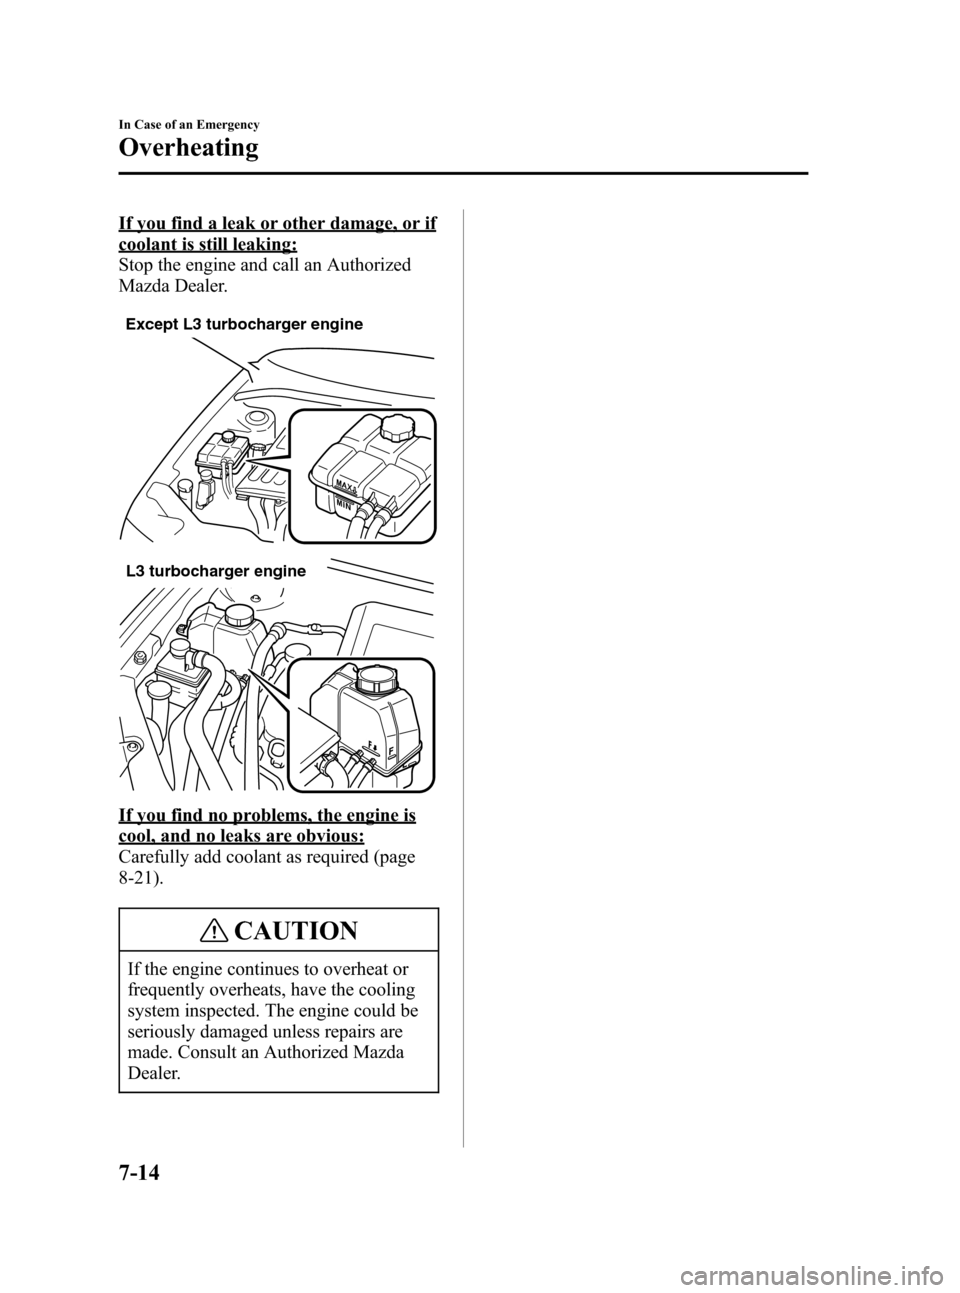 MAZDA MODEL 3 HATCHBACK 2007  Owners Manual (in English) Black plate (266,1)
If you find a leak or other damage, or if
coolant is still leaking:
Stop the engine and call an Authorized
Mazda Dealer.
Except L3 turbocharger engine
L3 turbocharger engine
If you